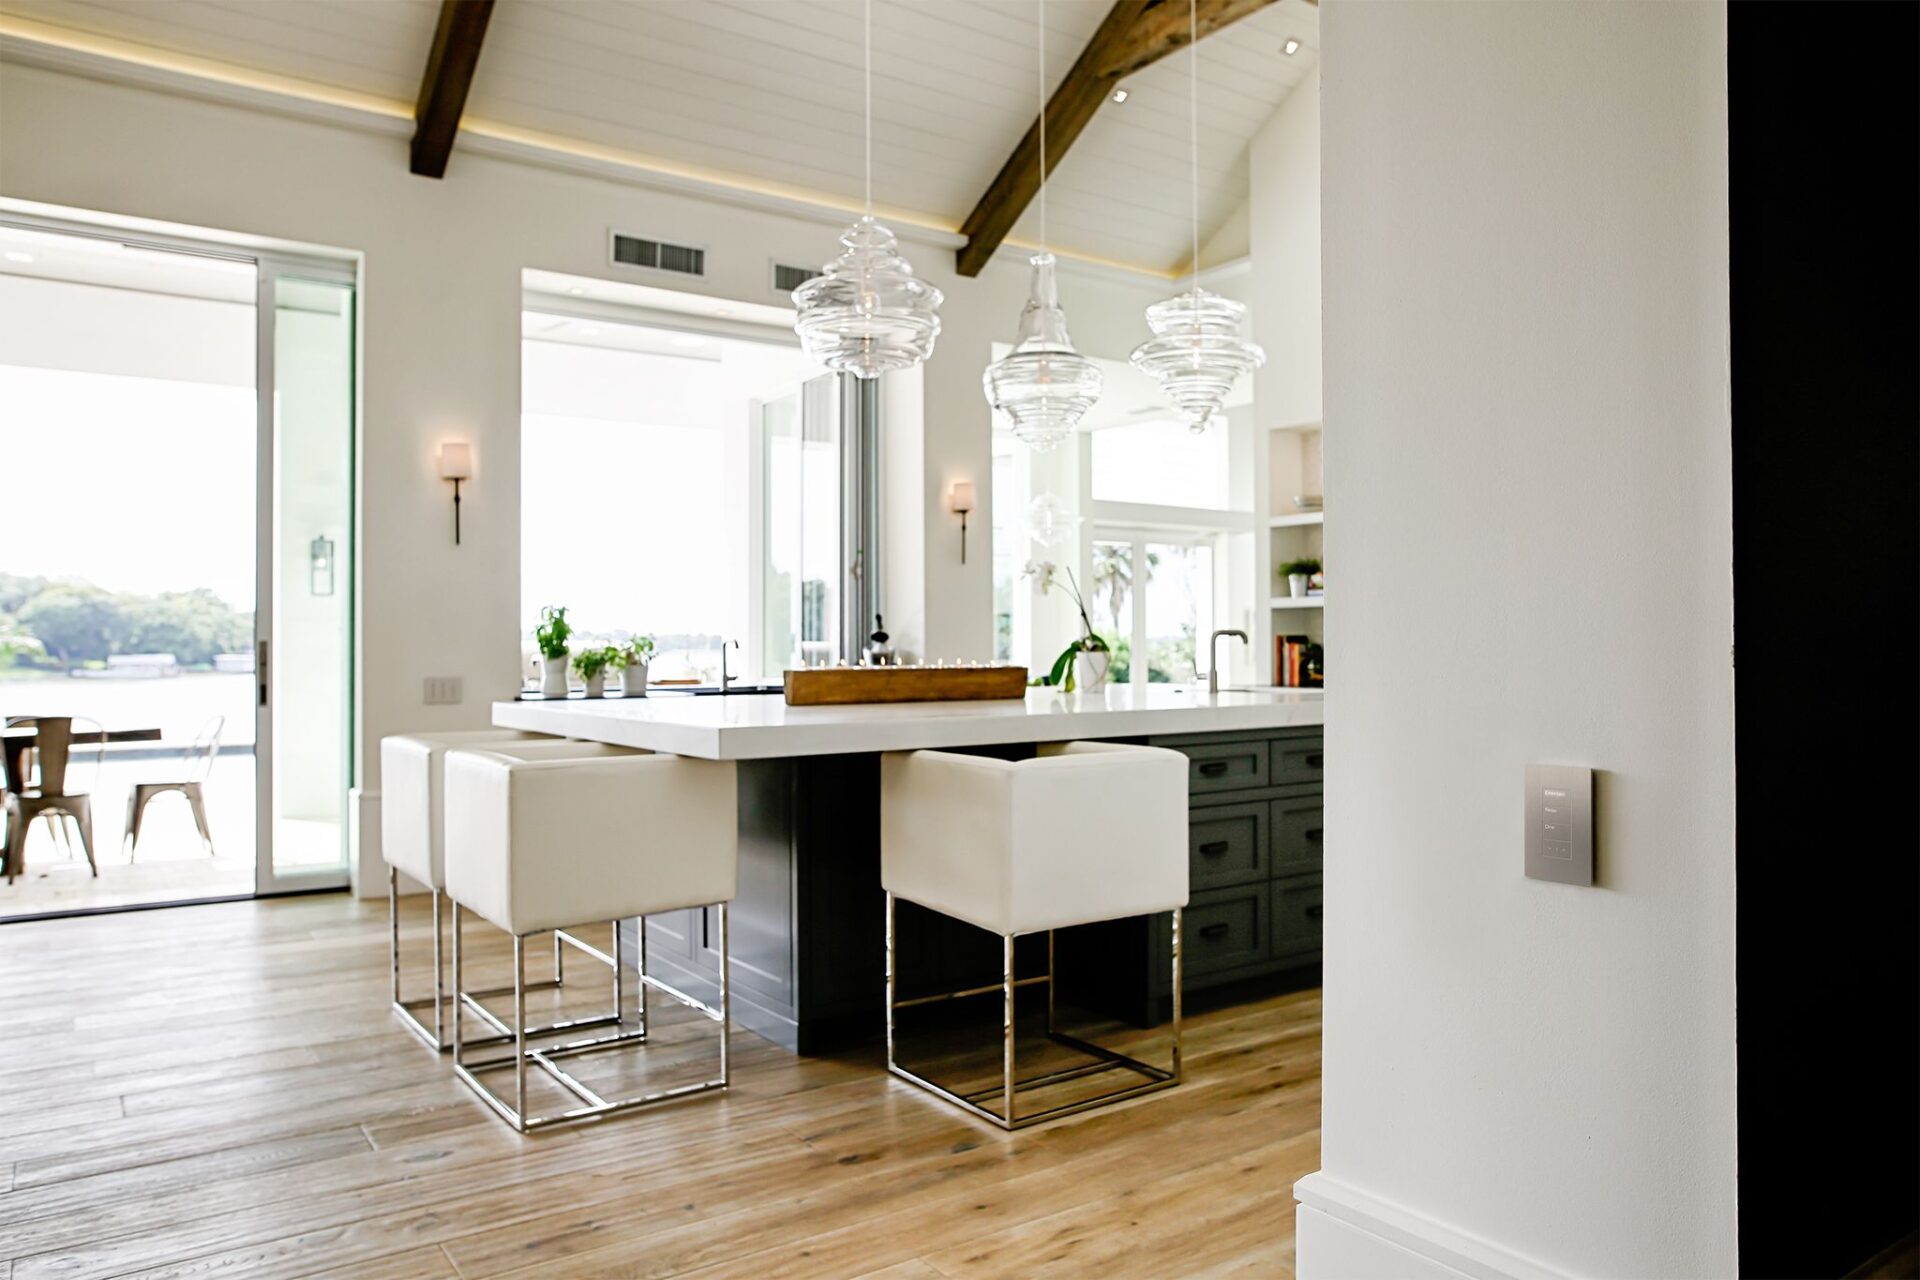 Modern kitchen interior with white bar stools at a black countertop island, three glass pendant lights, wooden floors, and a water view outdoors.